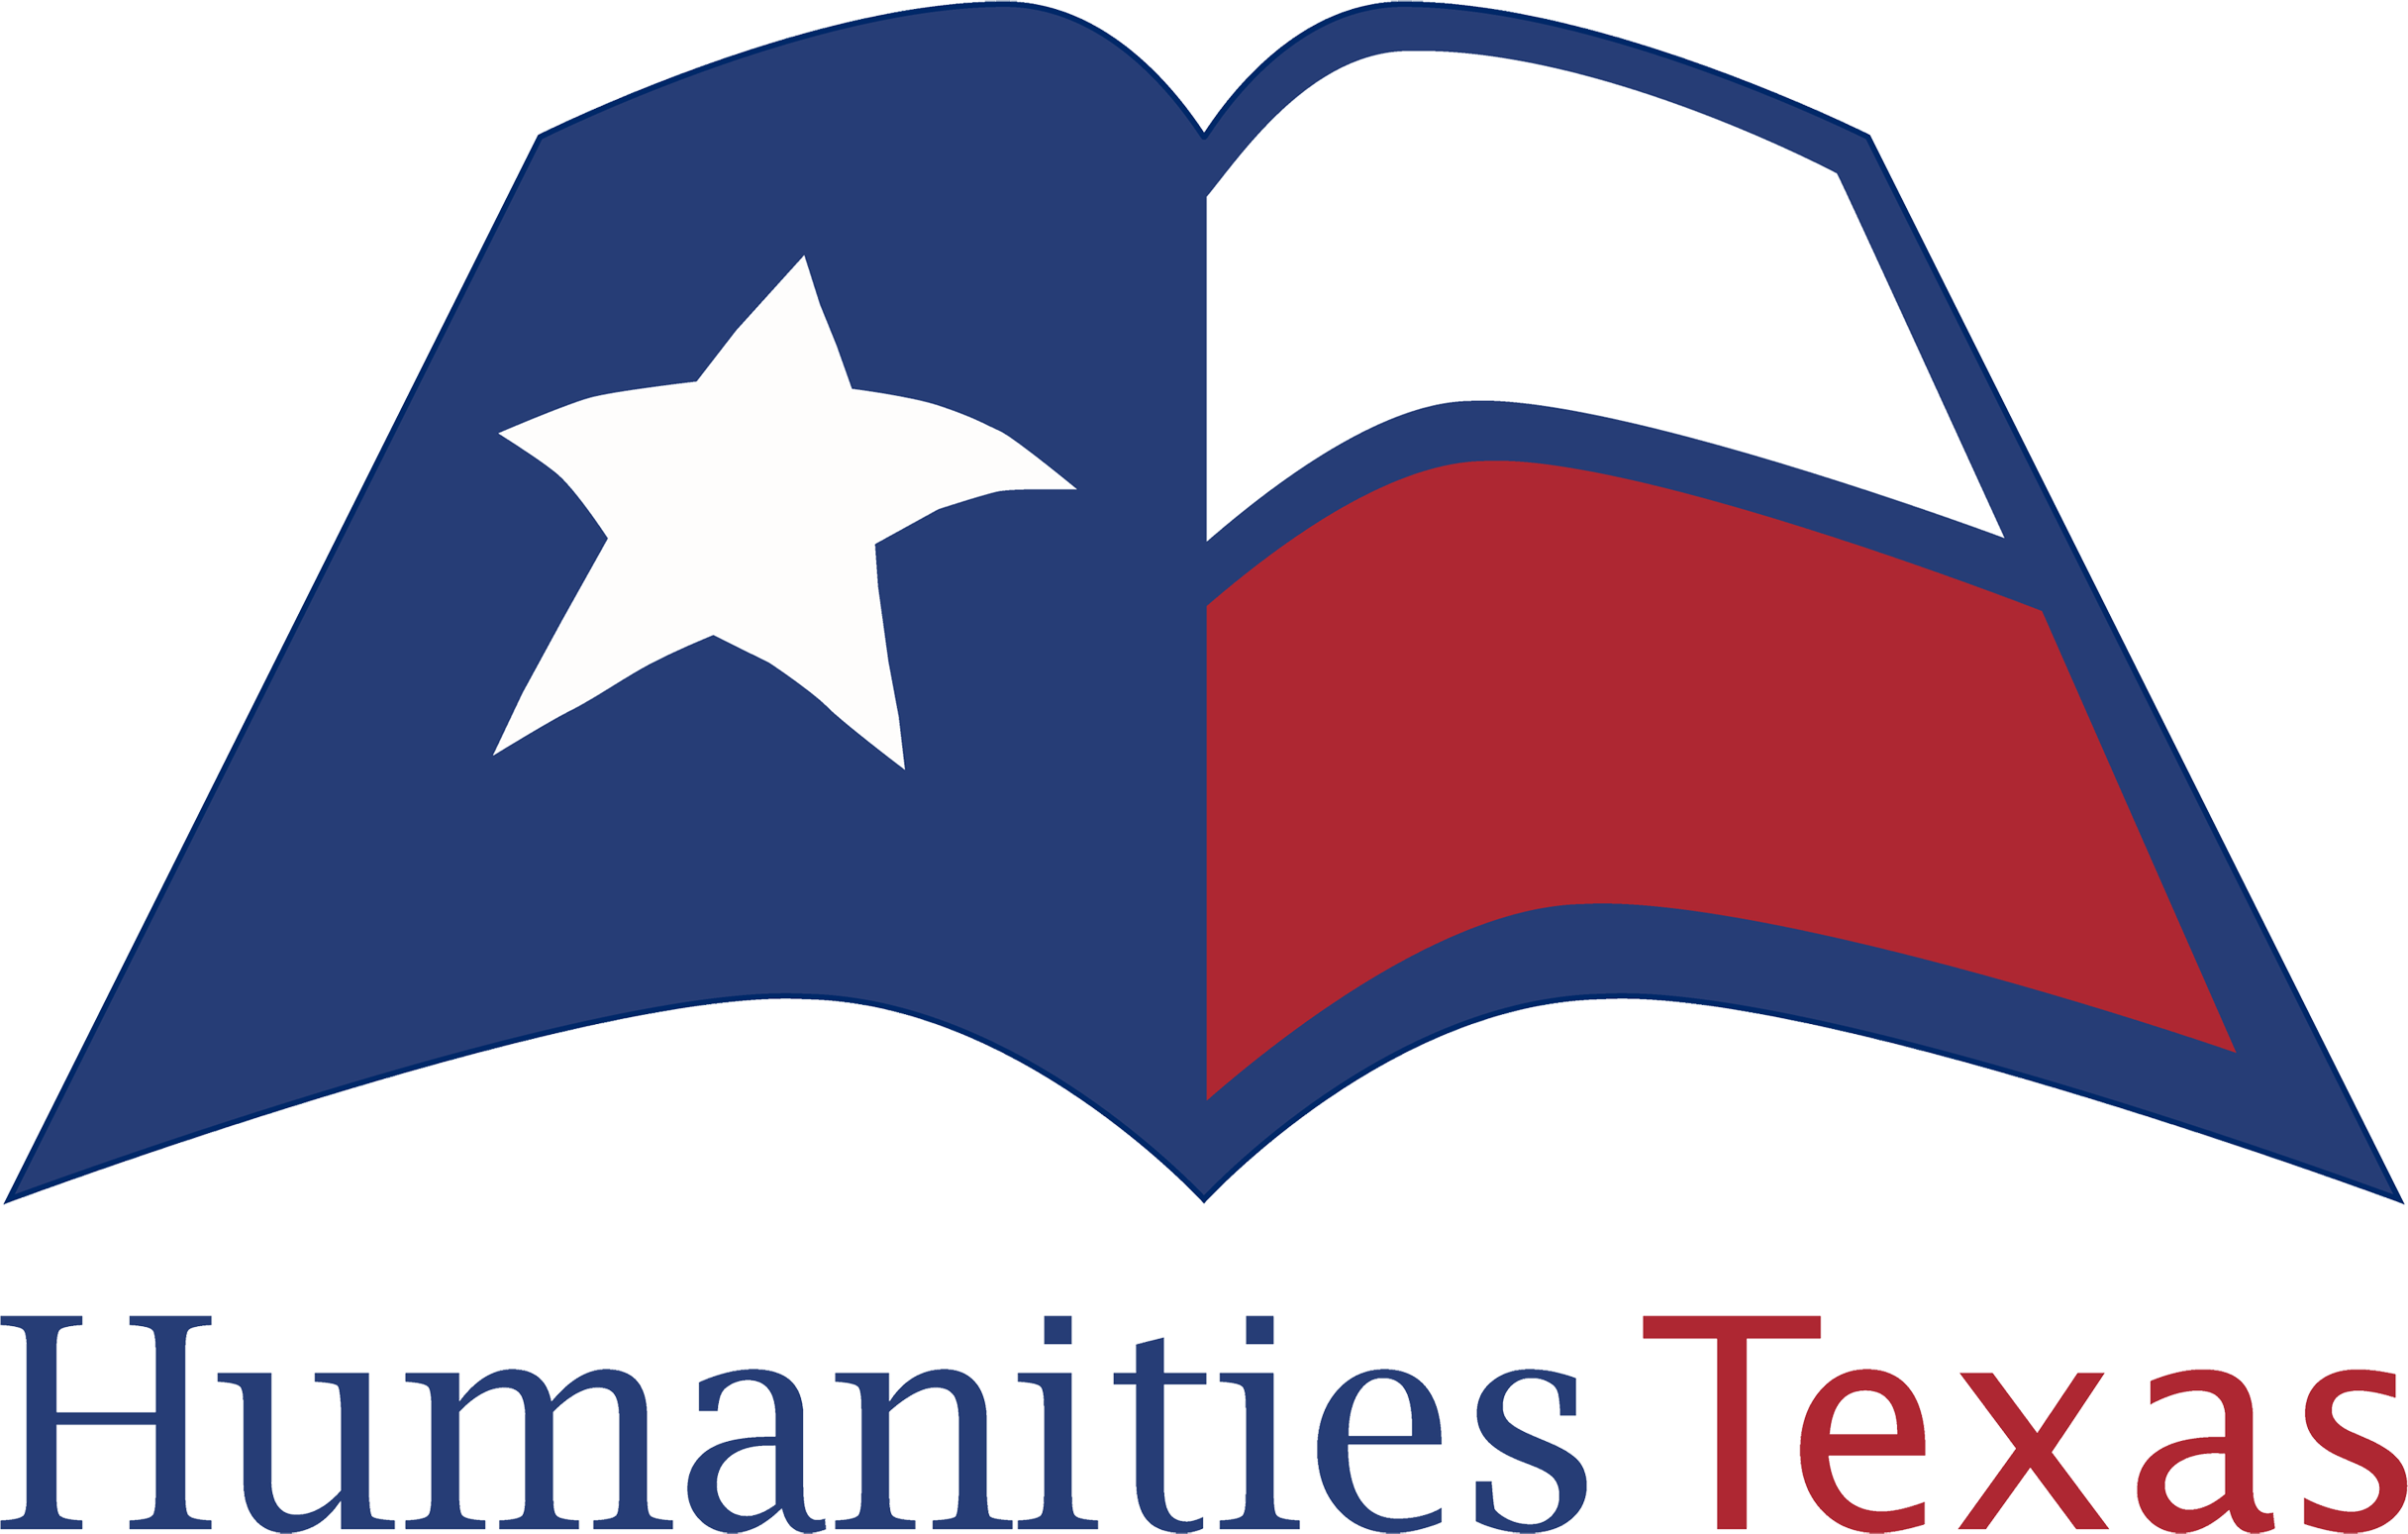 A logo that is an open book colored like the flag of Texas.